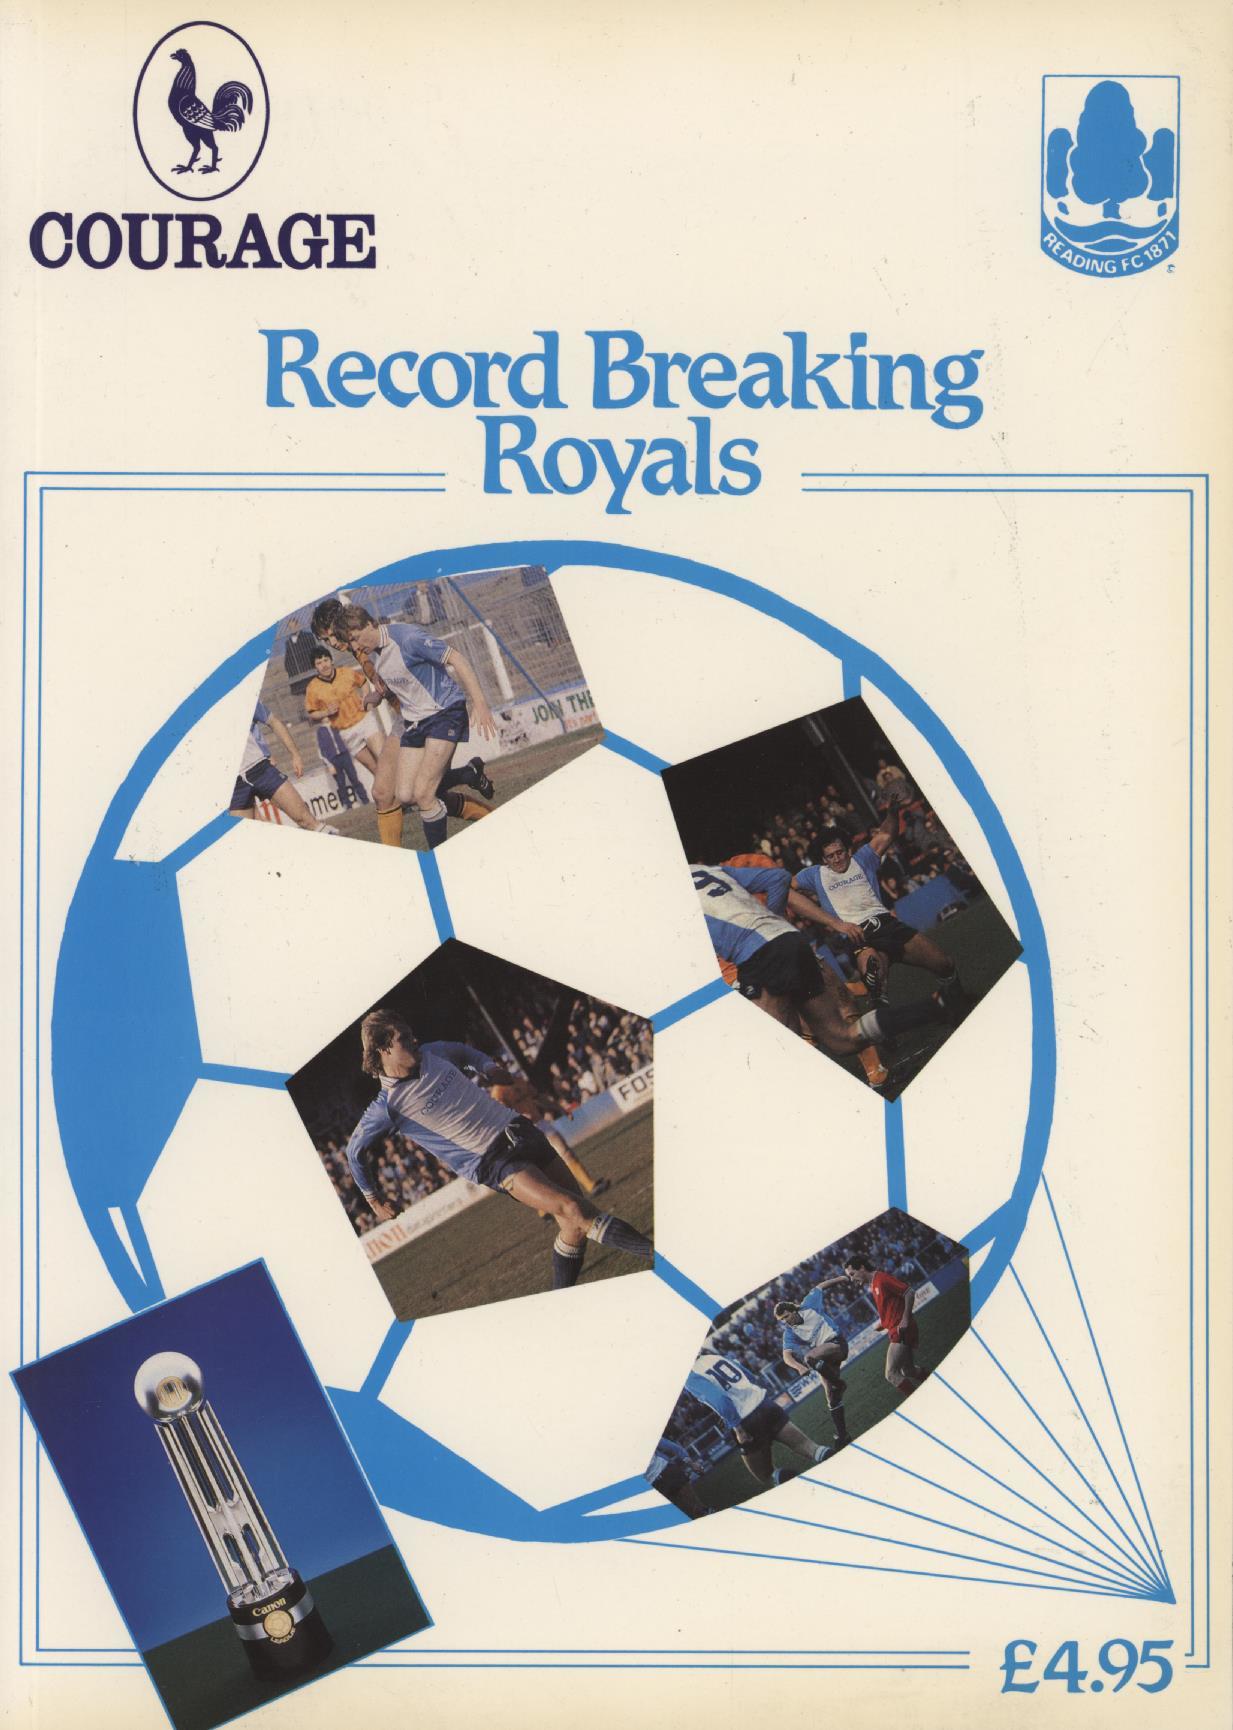 RECORD BREAKING ROYALS Books on Football Clubs